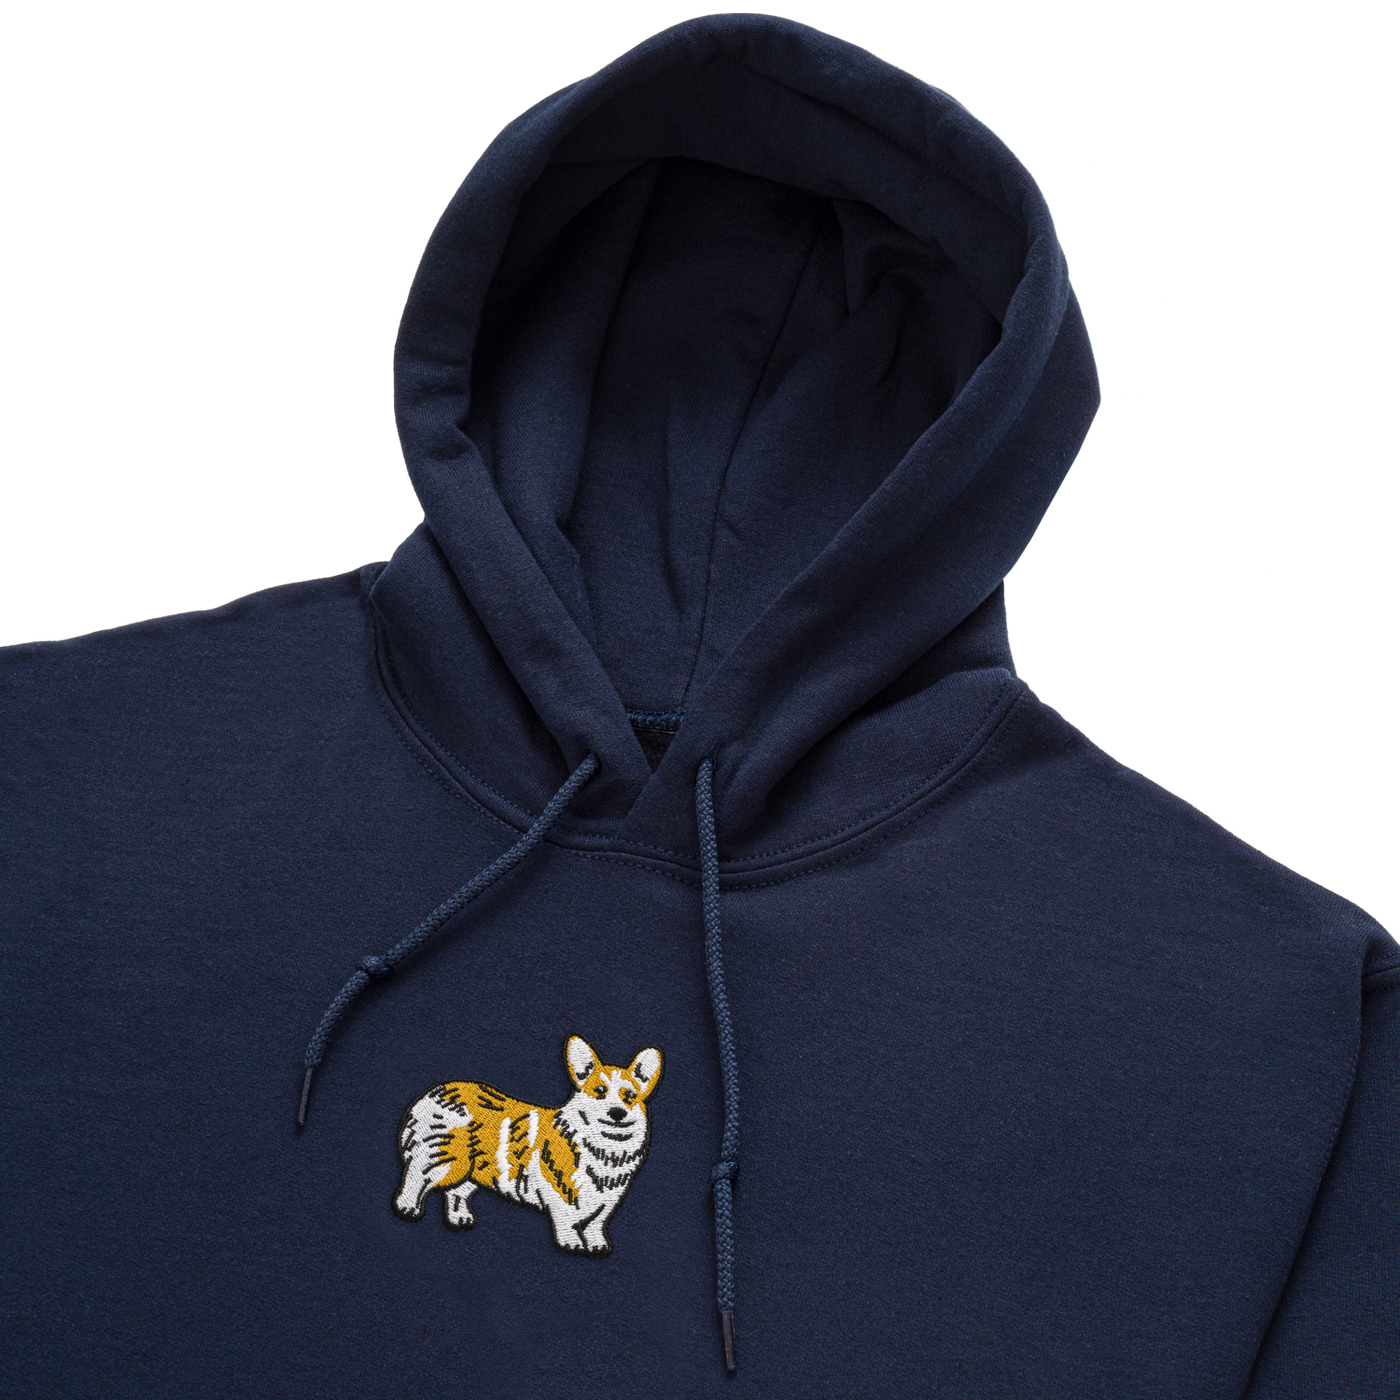 Bobby's Planet Women's Embroidered Corgi Hoodie from Paws Dog Cat Animals Collection in Navy Color#color_navy